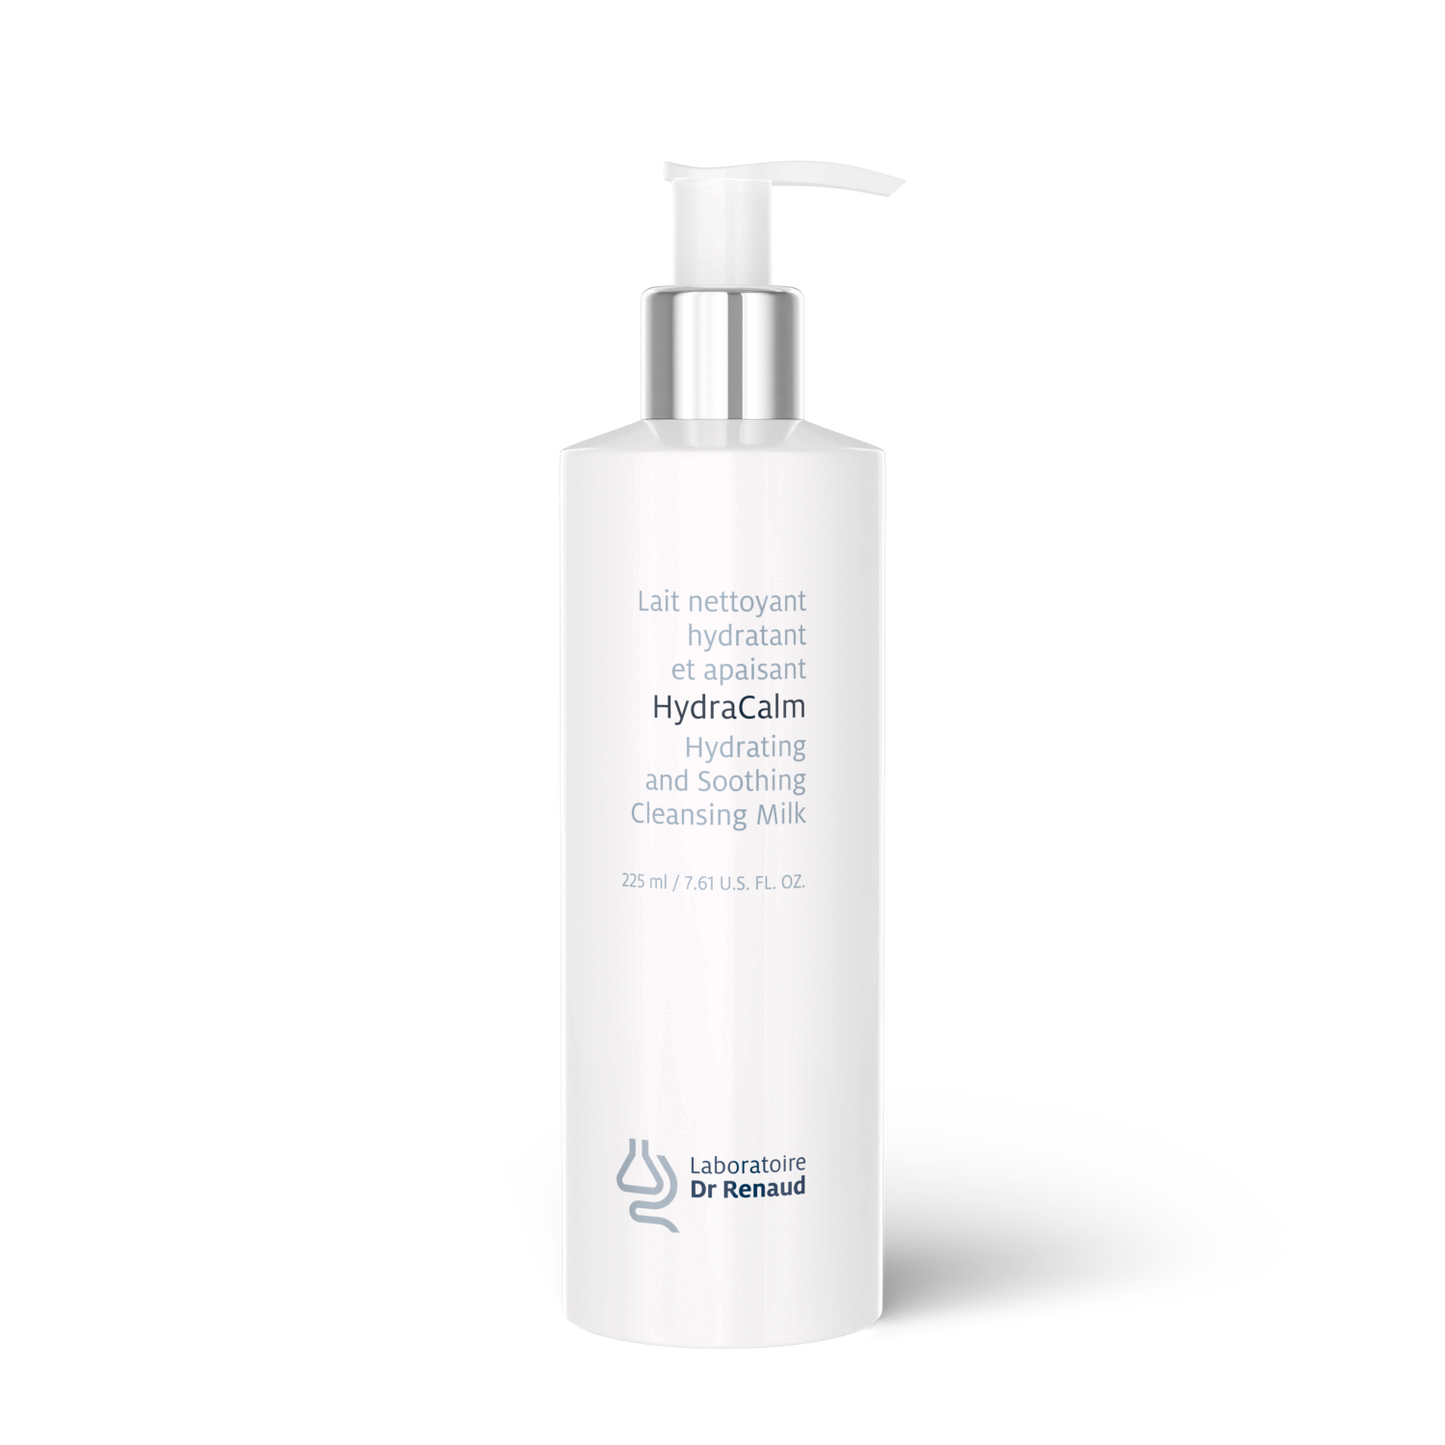 Dr. Renaud - HydraCalm Hydrating & Soothing Cleansing Milk